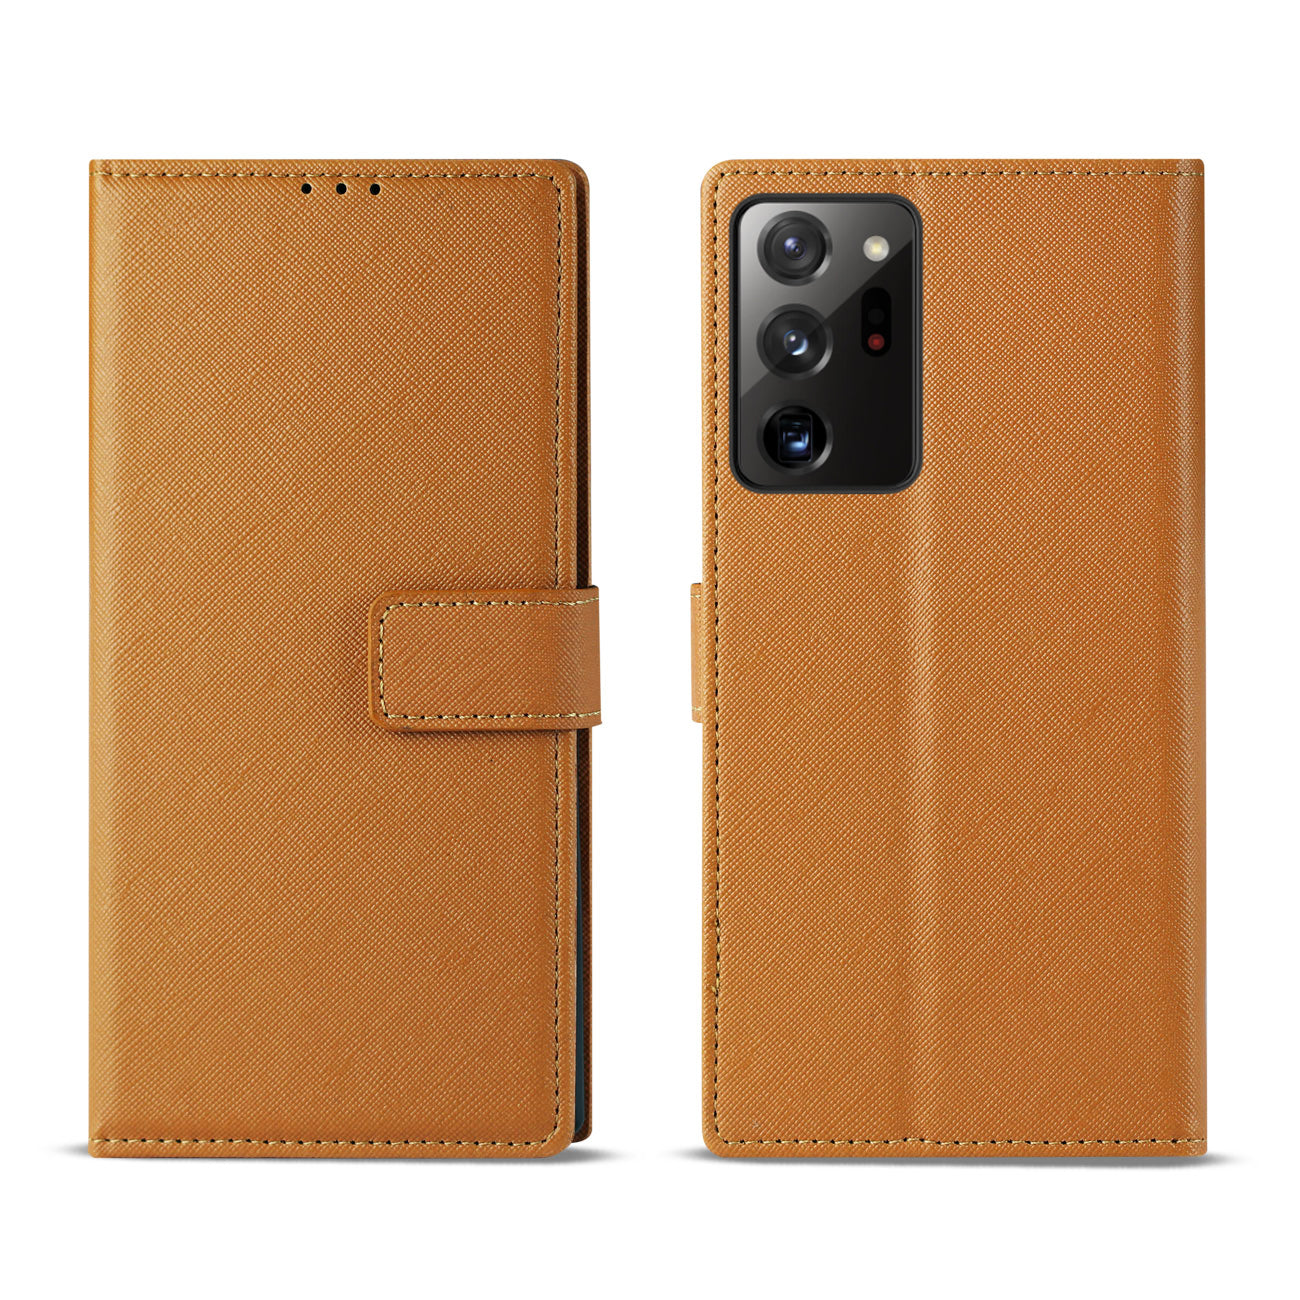 Case Slim Stand with Card Slots Samsung Galaxy Note 20 Ultra Brown Color